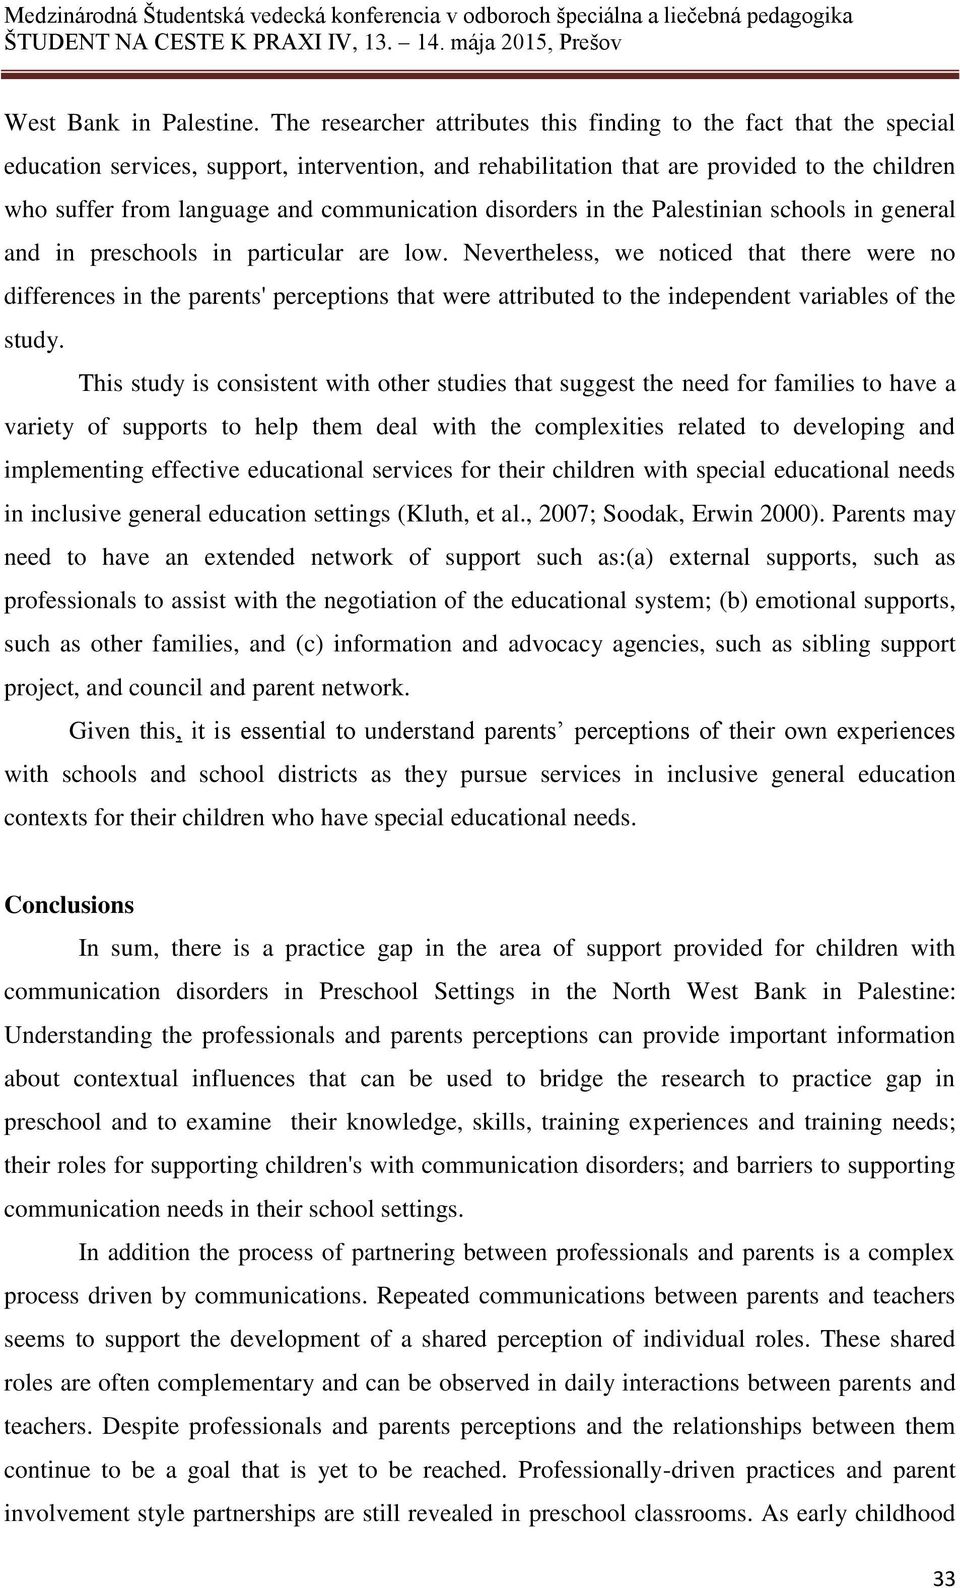 communication disorders in the Palestinian schools in general and in preschools in particular are low.